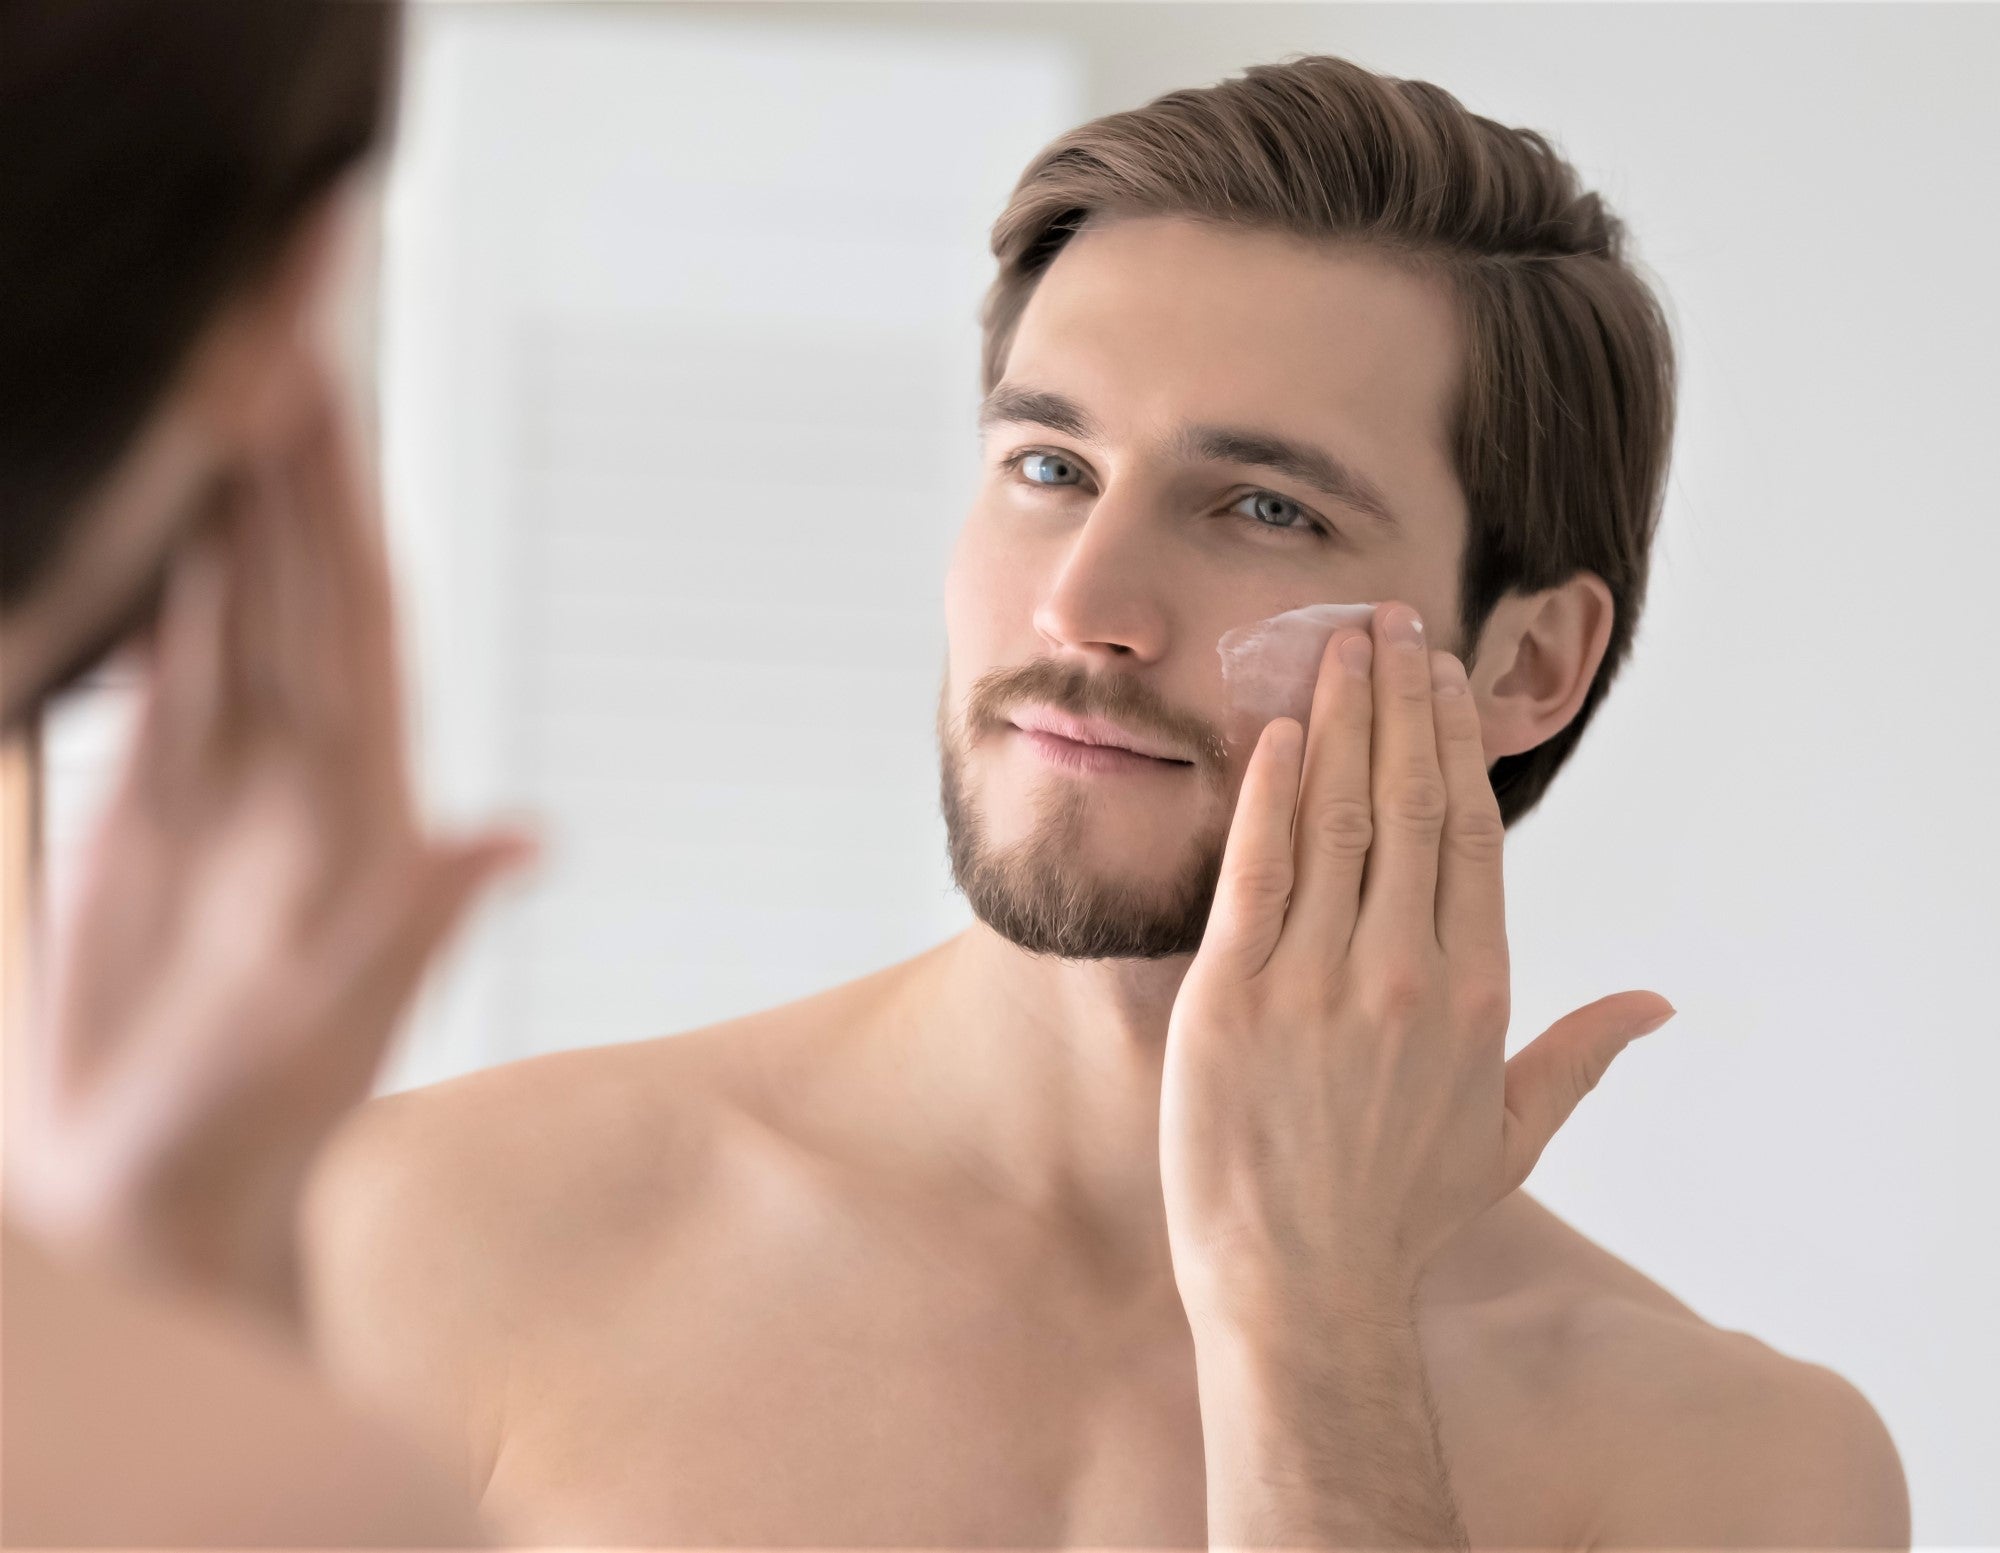 A man applies Dermaworks expert daily moisturiser for men to his face. Our anti-aging face cream for men helps to hydrate, brighten and reduce the appearance of wrinkles.